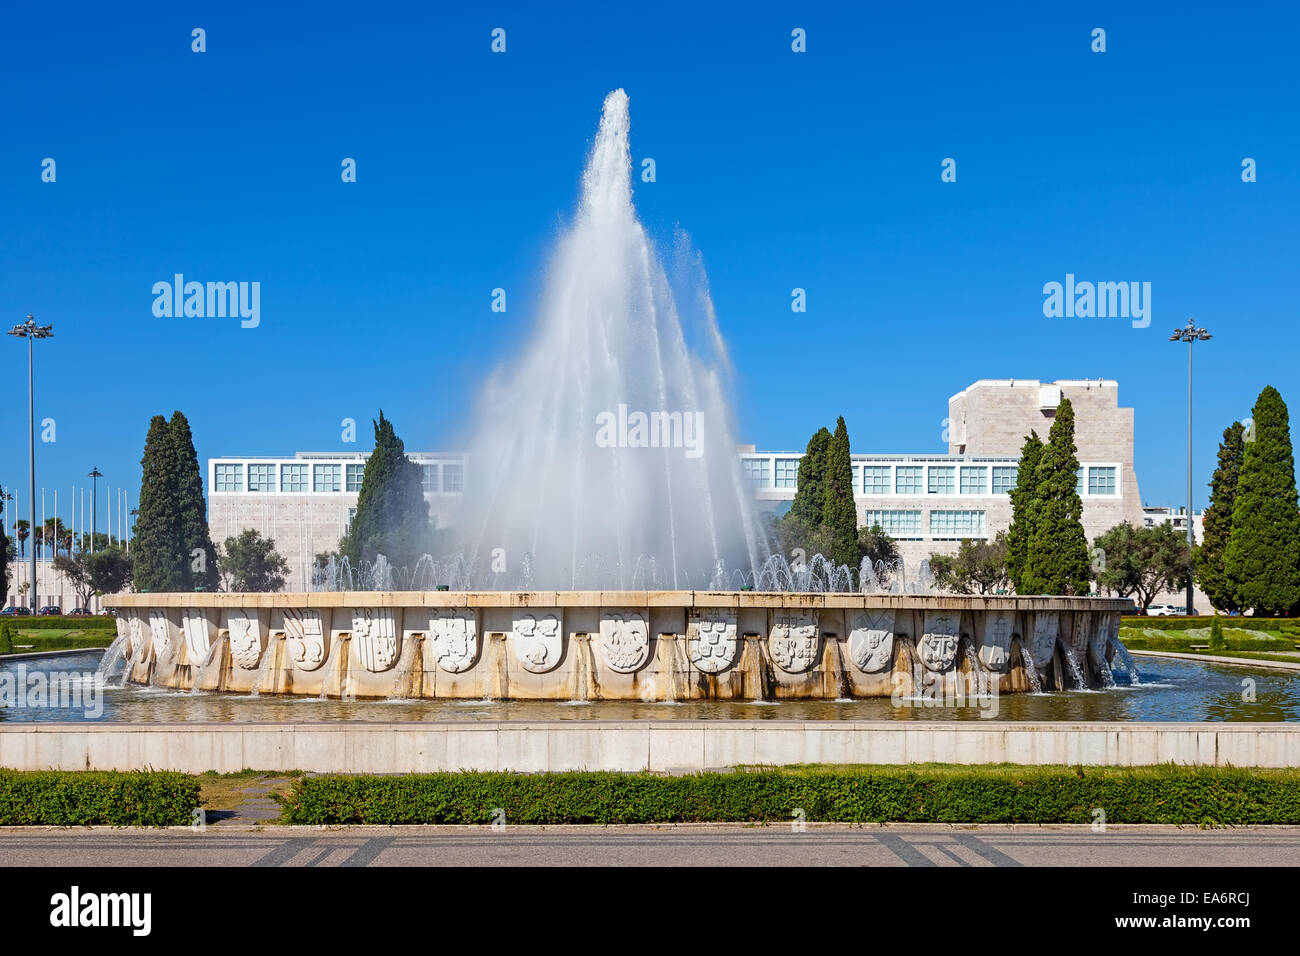 Fountain in the Imperio garden with Centro Cultural de Belem - CCB - in background in Lisbon, Portugal. Stock Photo